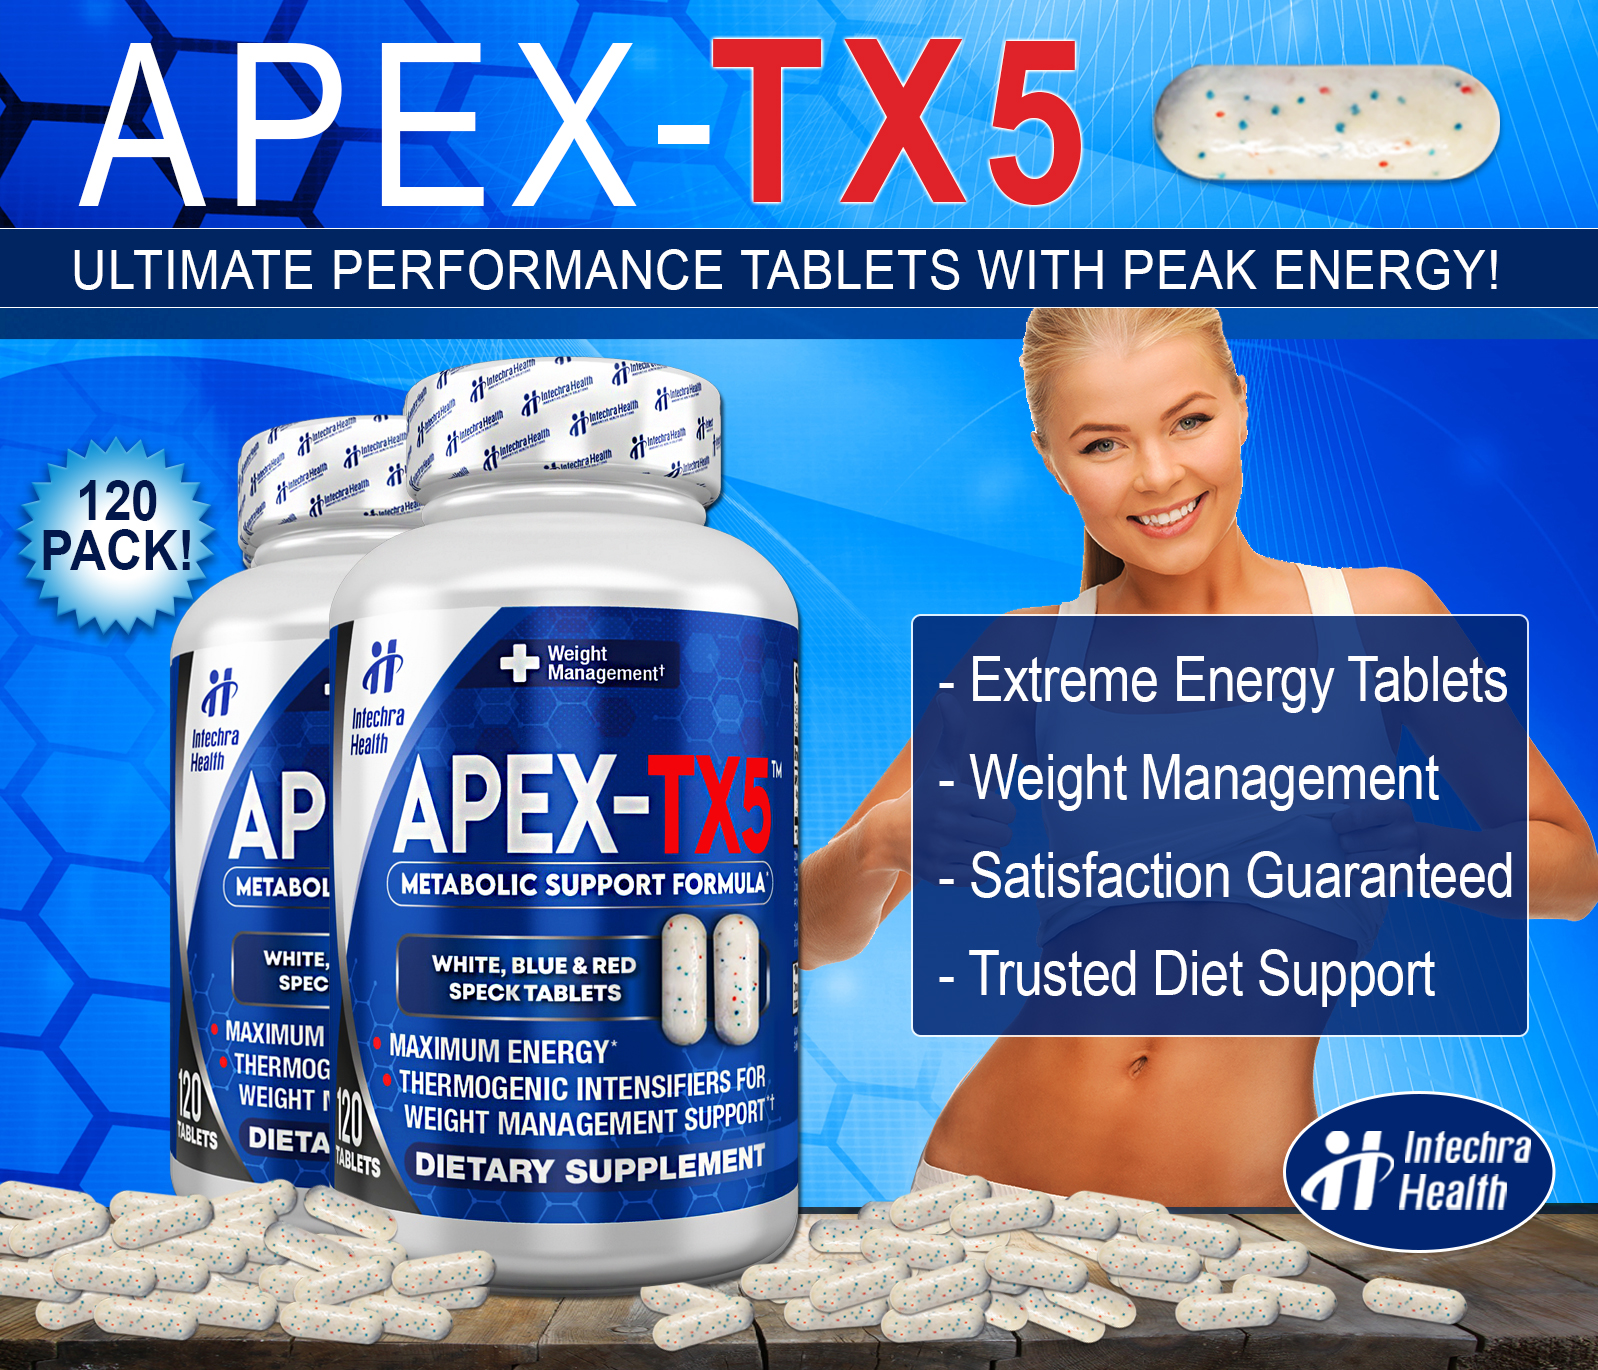 APEX-TX5 Diet Pills - Weight Management & Energy Support, 120 Tablets Per Bottle - image 4 of 7